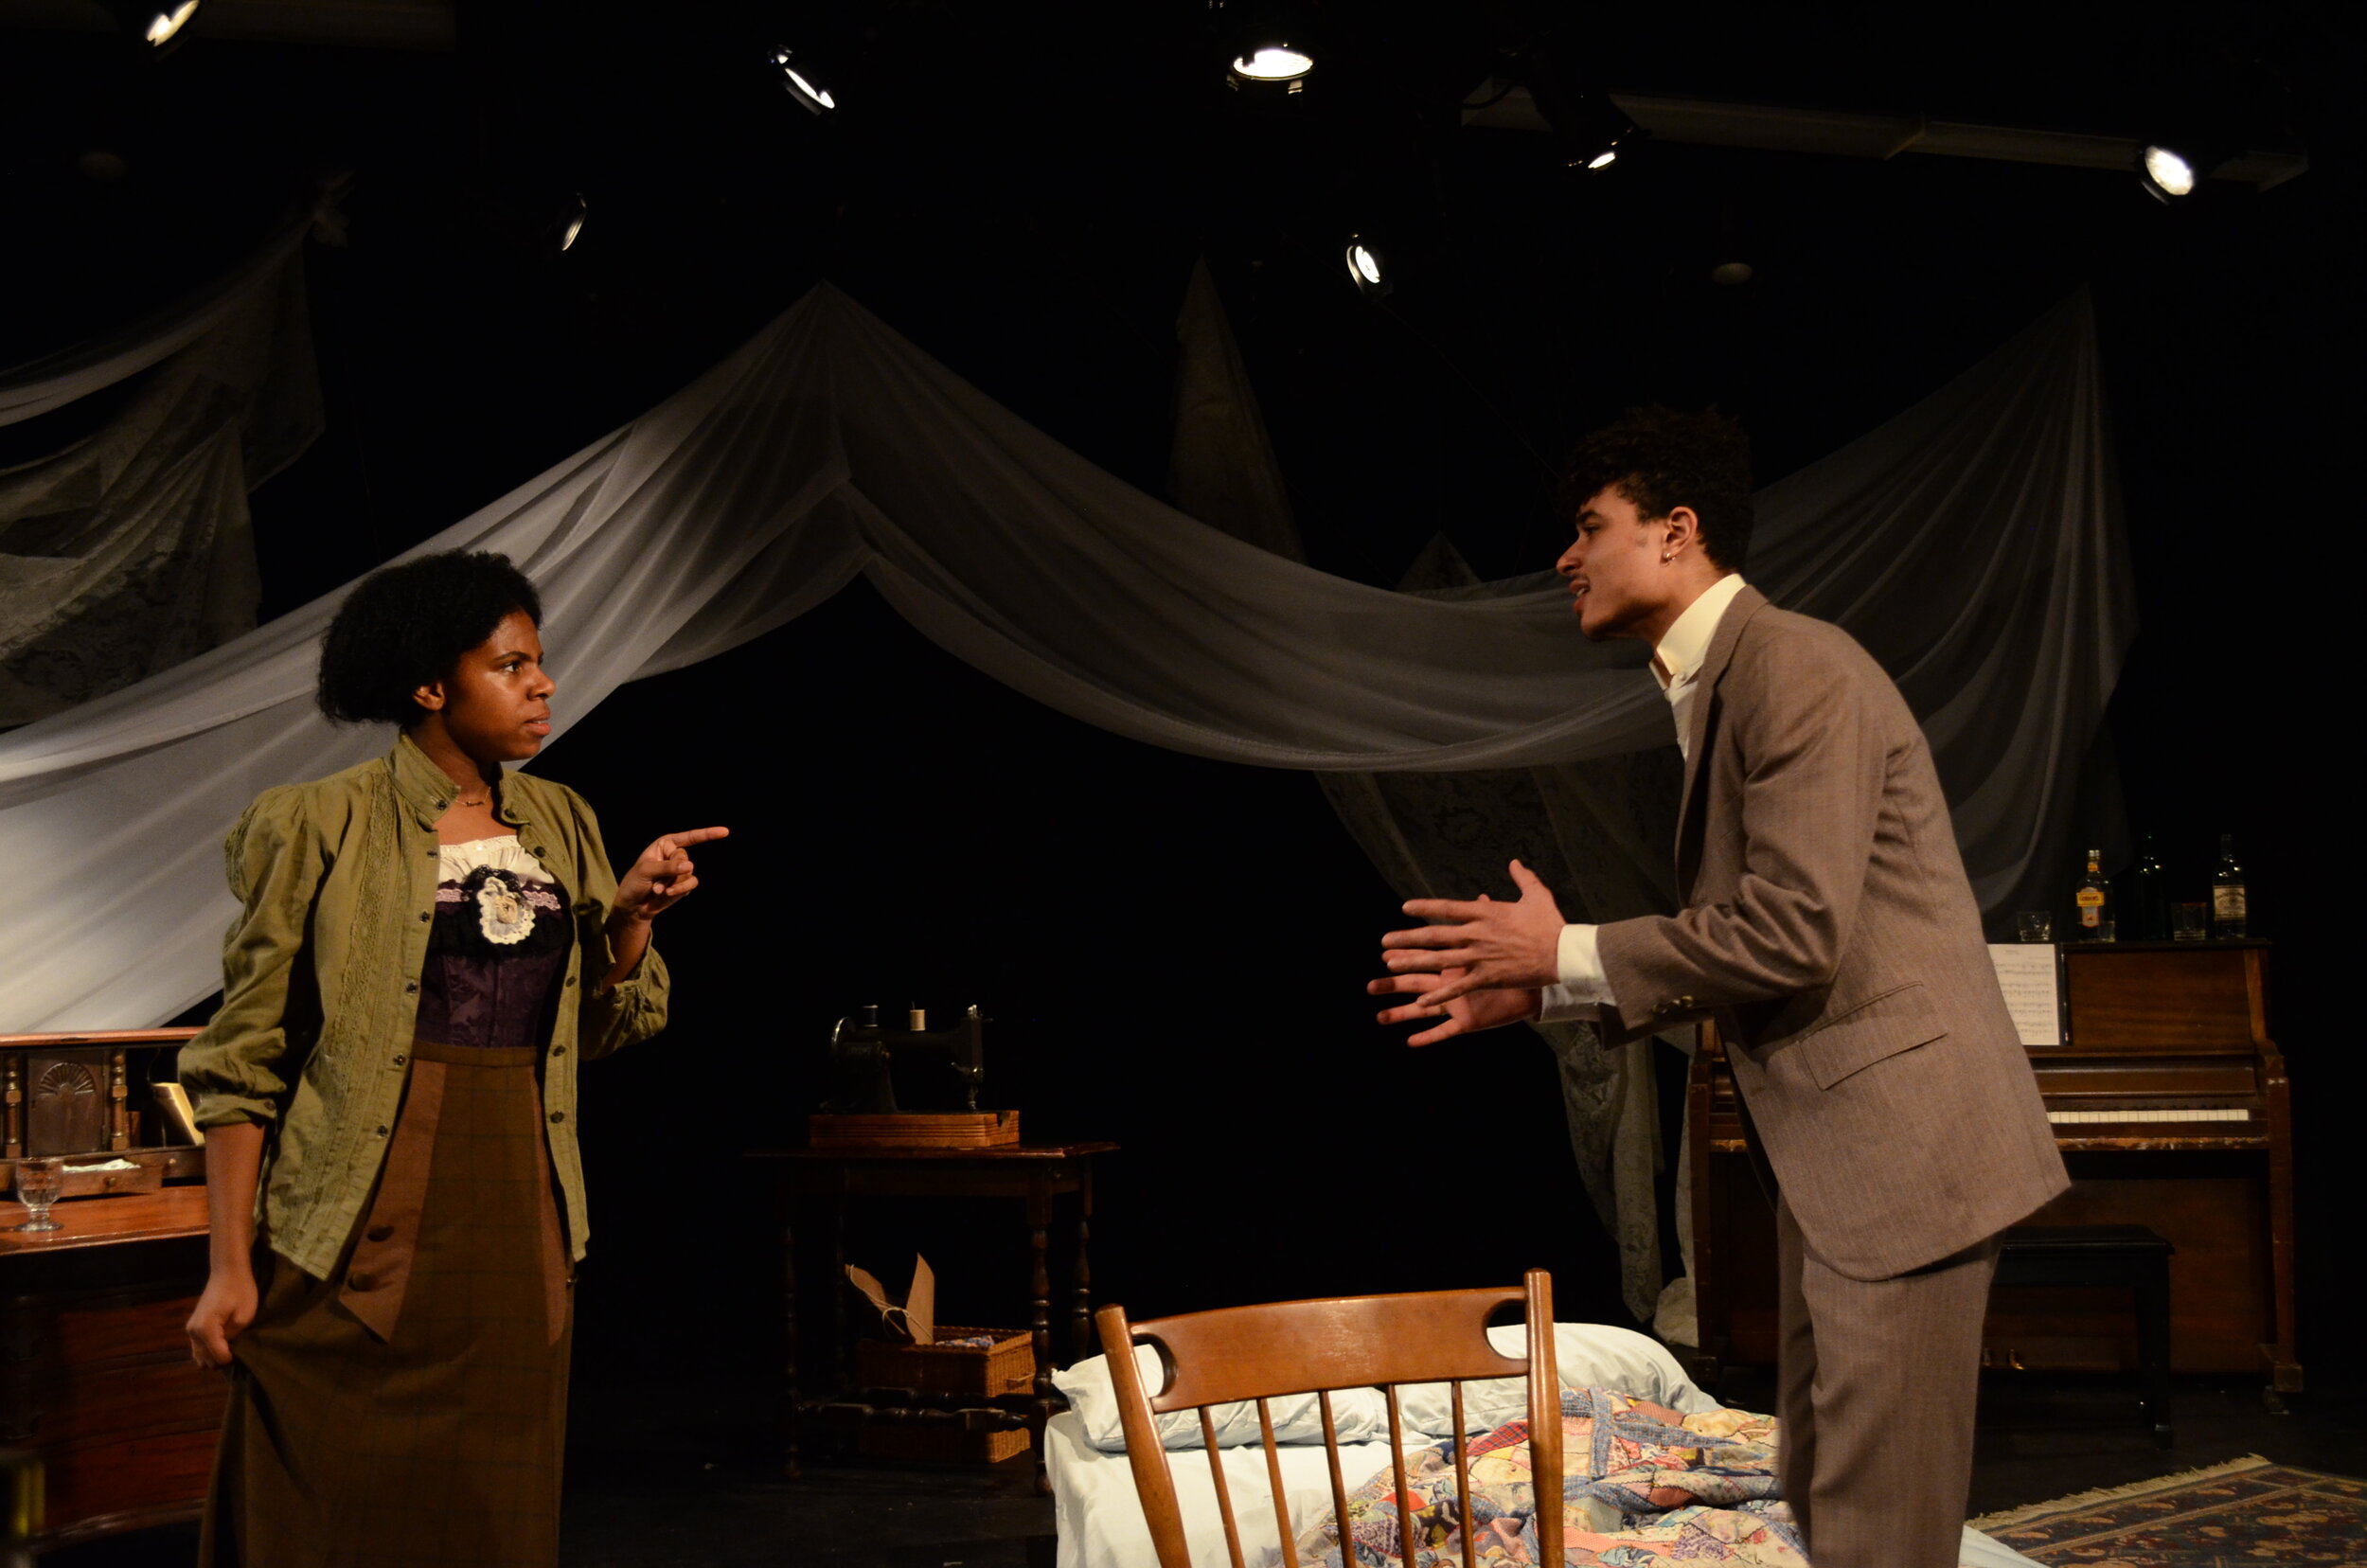   Dani Palmer  as Esther Mills and Miles Jordan as George Armstrong in INTIMATE APPAREL, directed by Avital Shira.  Photo by  Stephanie Lynn Yackovetsky . 